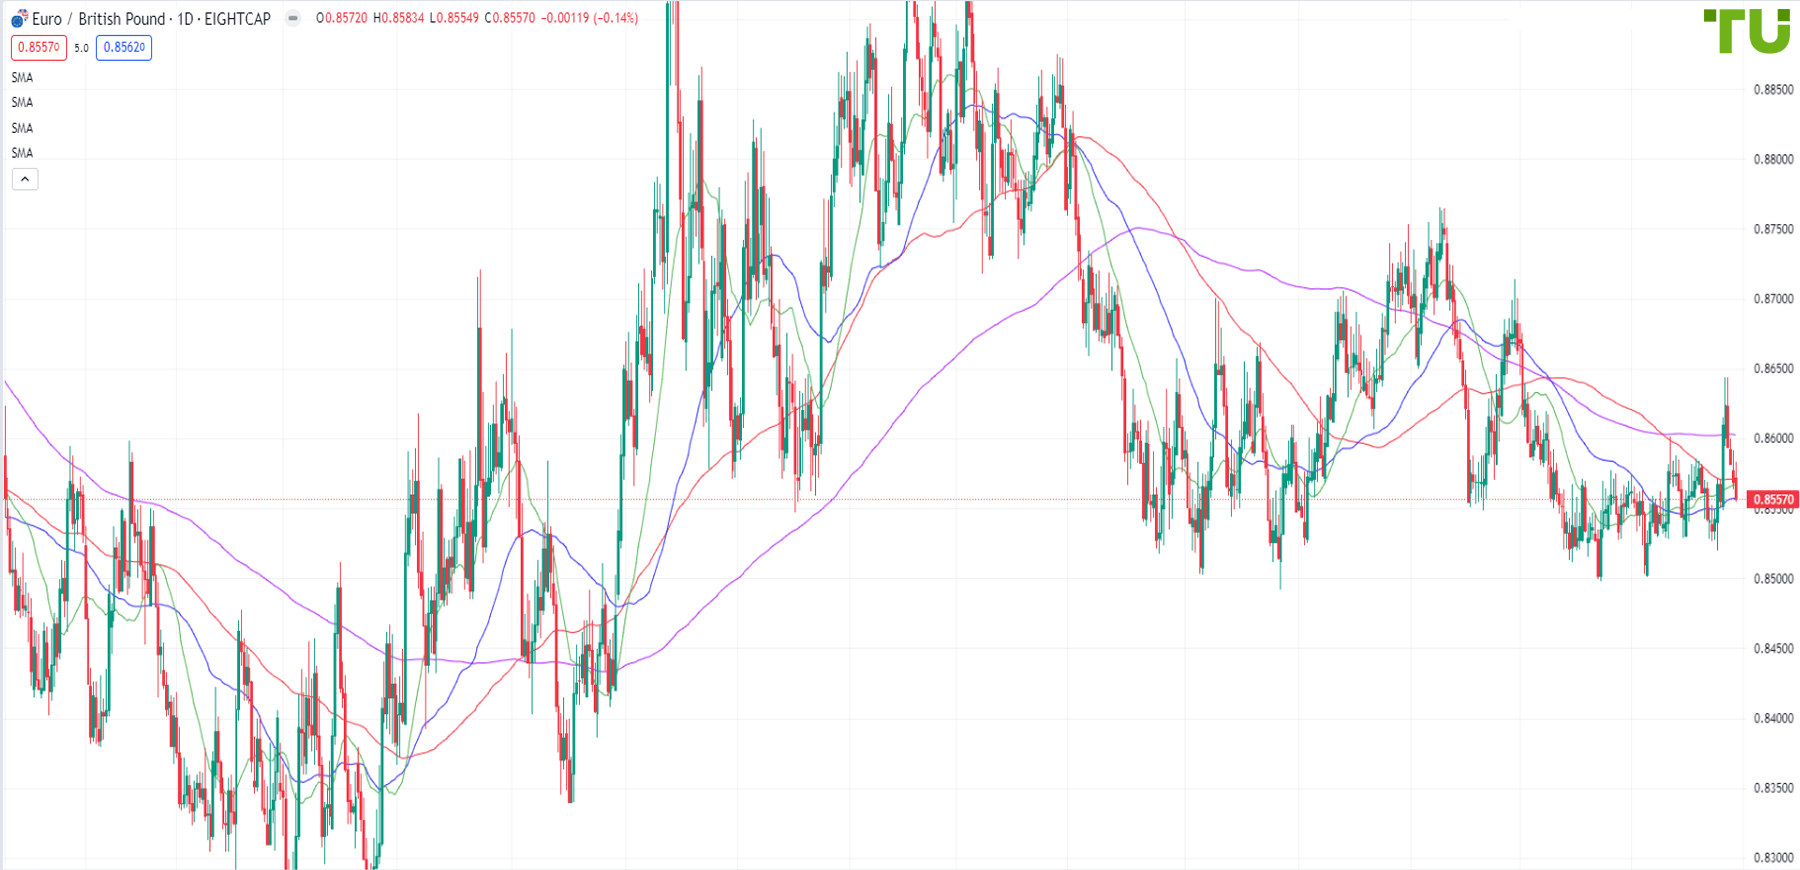 EUR/GBP continues to decline